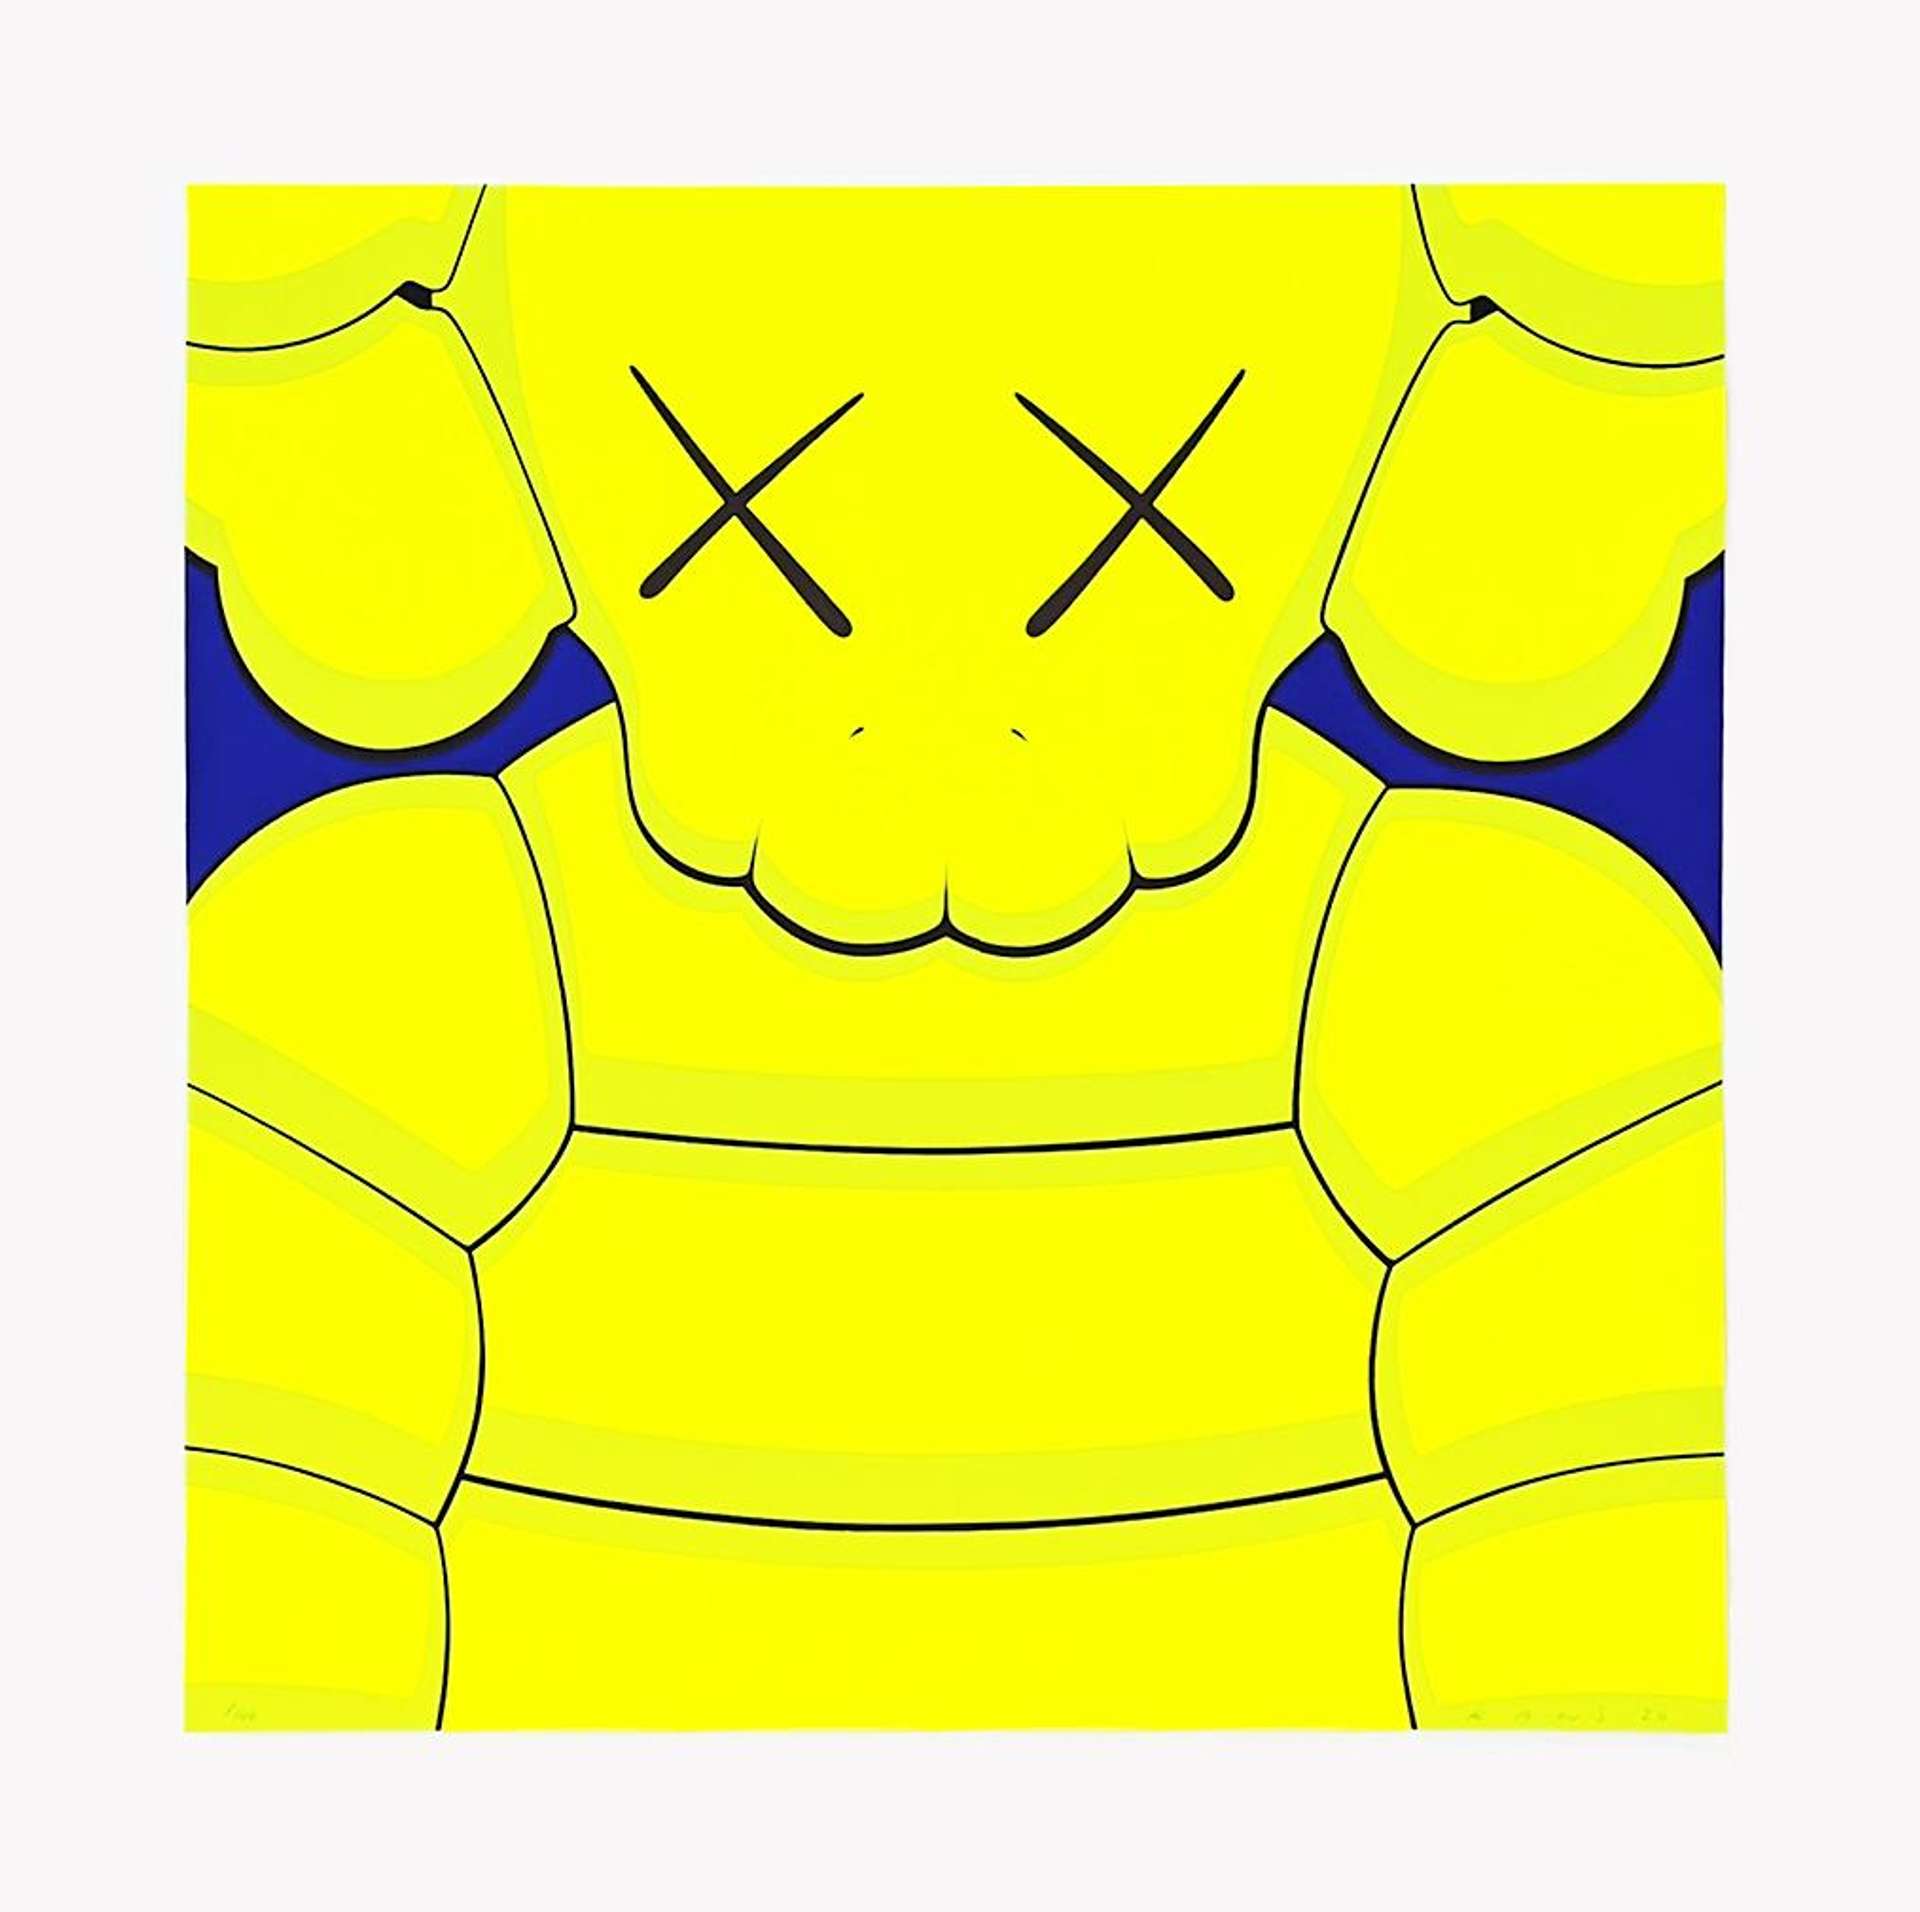 KAWS’ What Party (yellow on blue). A screenprint of a lime green character with two x marks for eyes against a navy blue background.